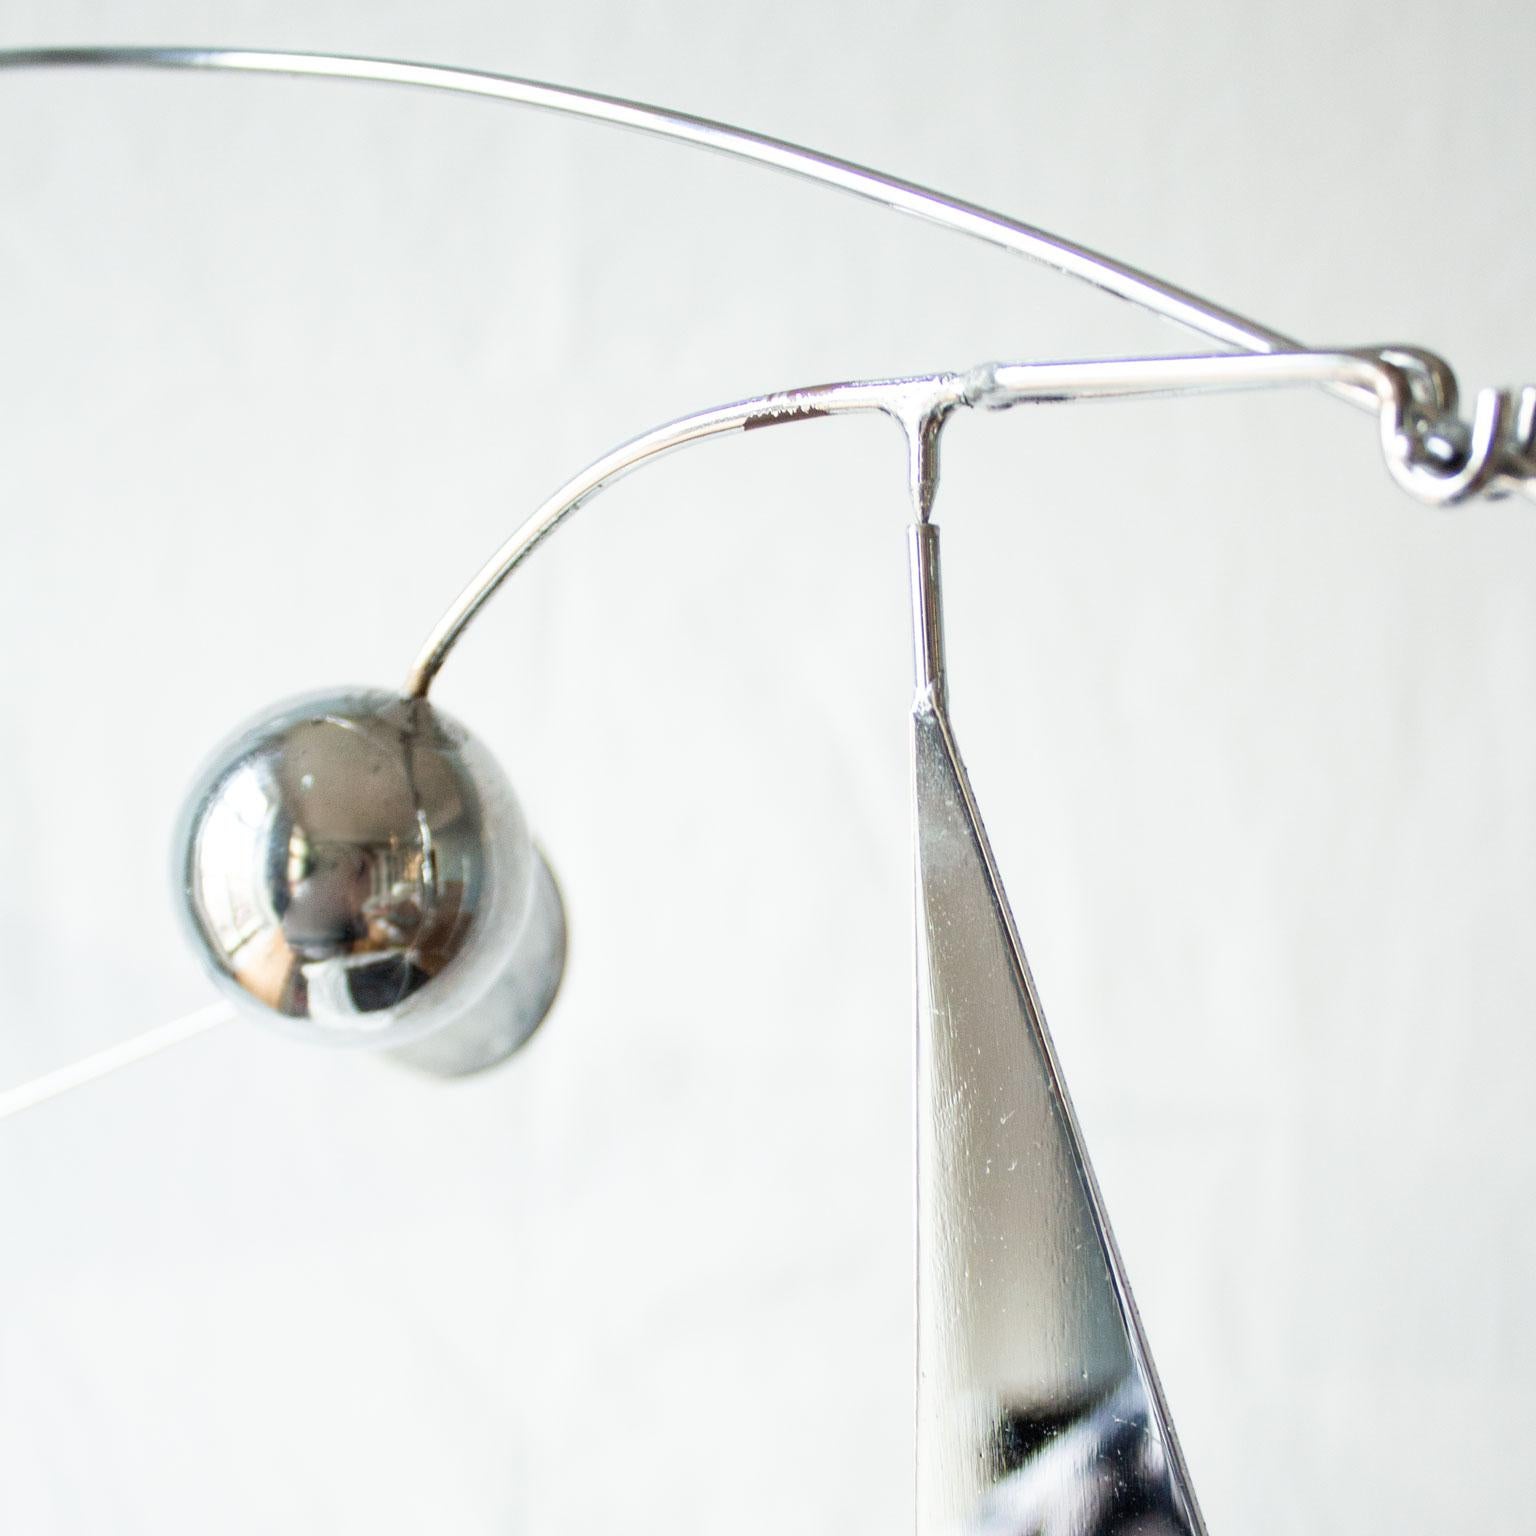 Chrome Kinetic Stabile Mobile Sculpture Signed by Francois Collette from 1976